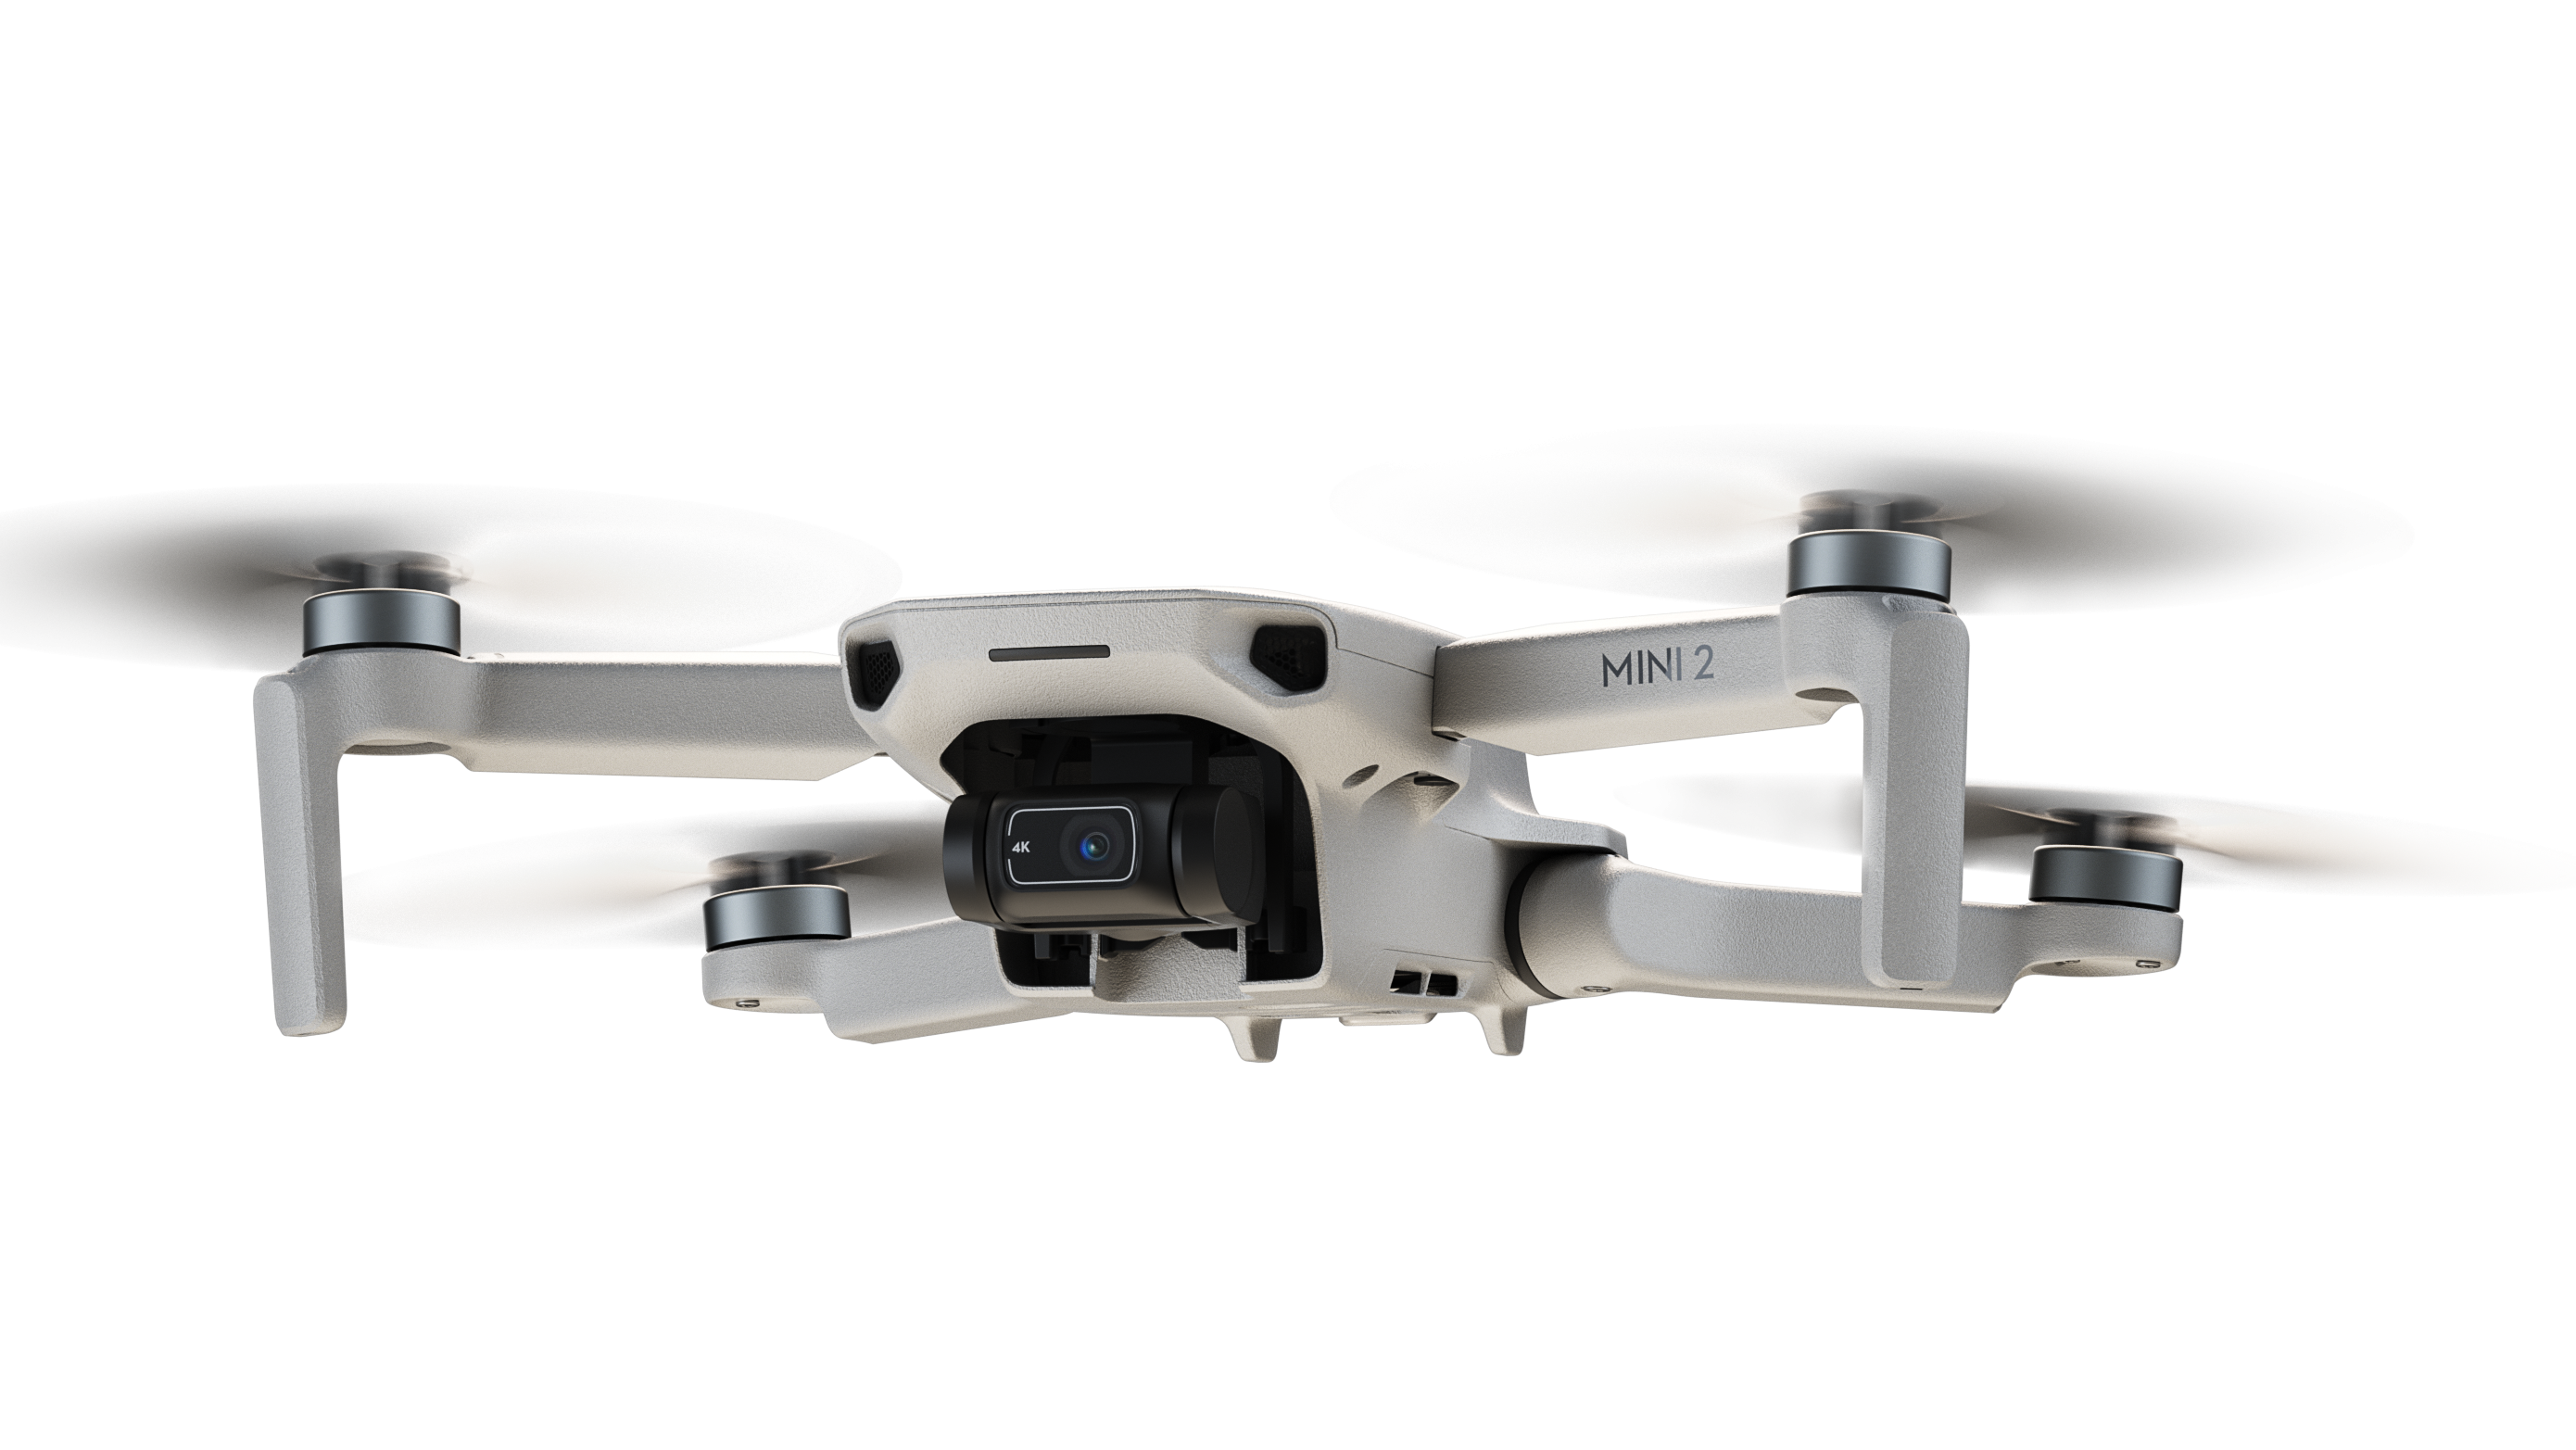 DJI slashes Mini 2 drone Fly More Combo to $479 for Prime Day